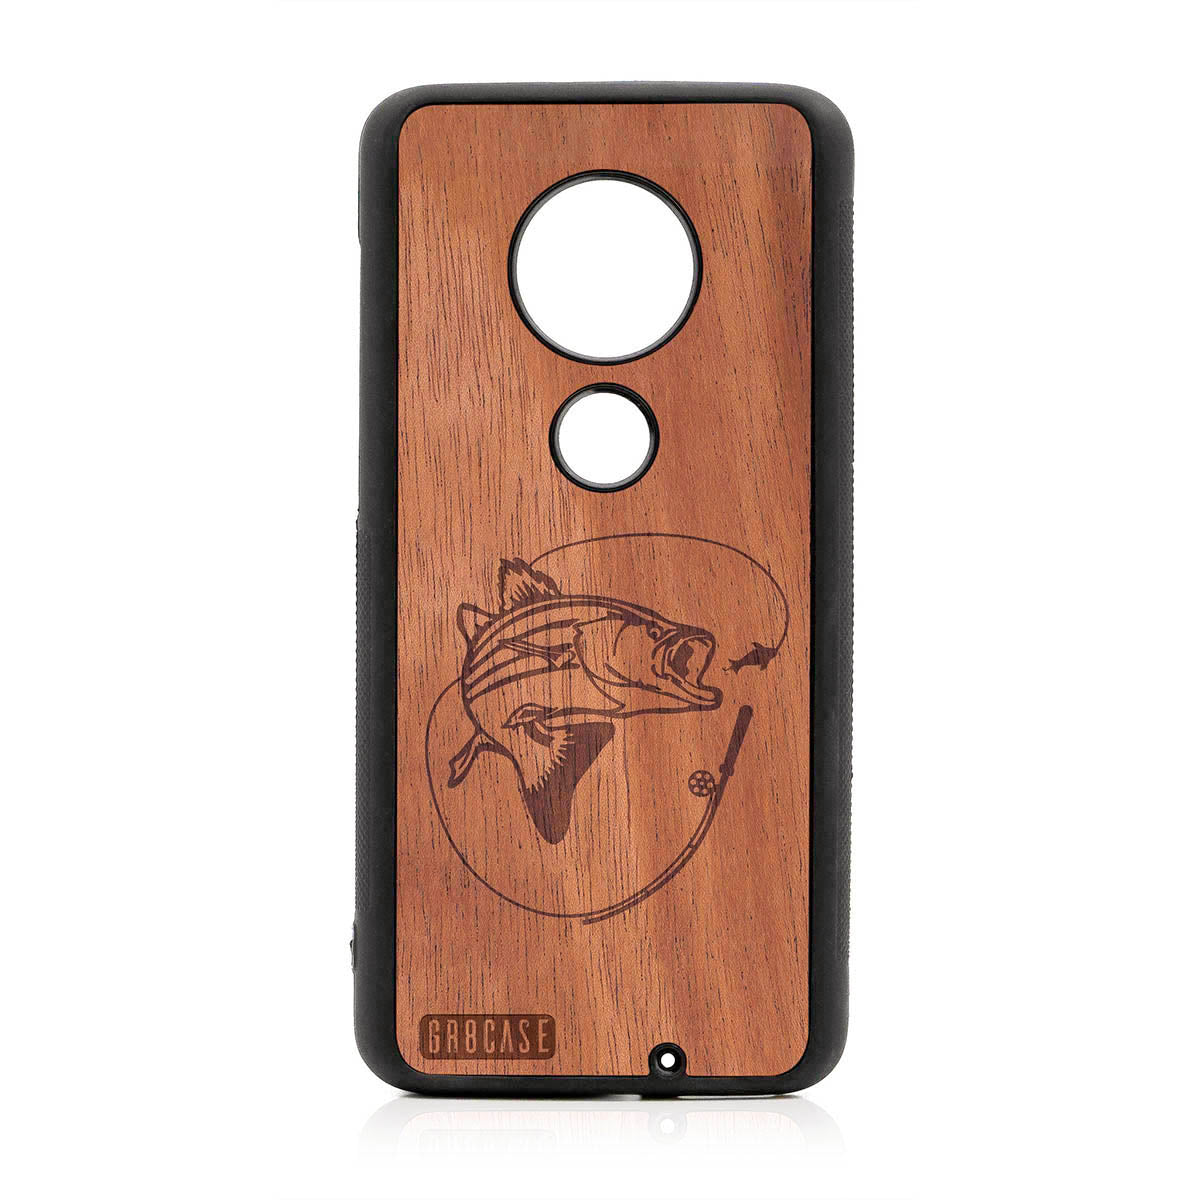 Fish and Reel Design Wood Case For Moto G7 Plus by GR8CASE